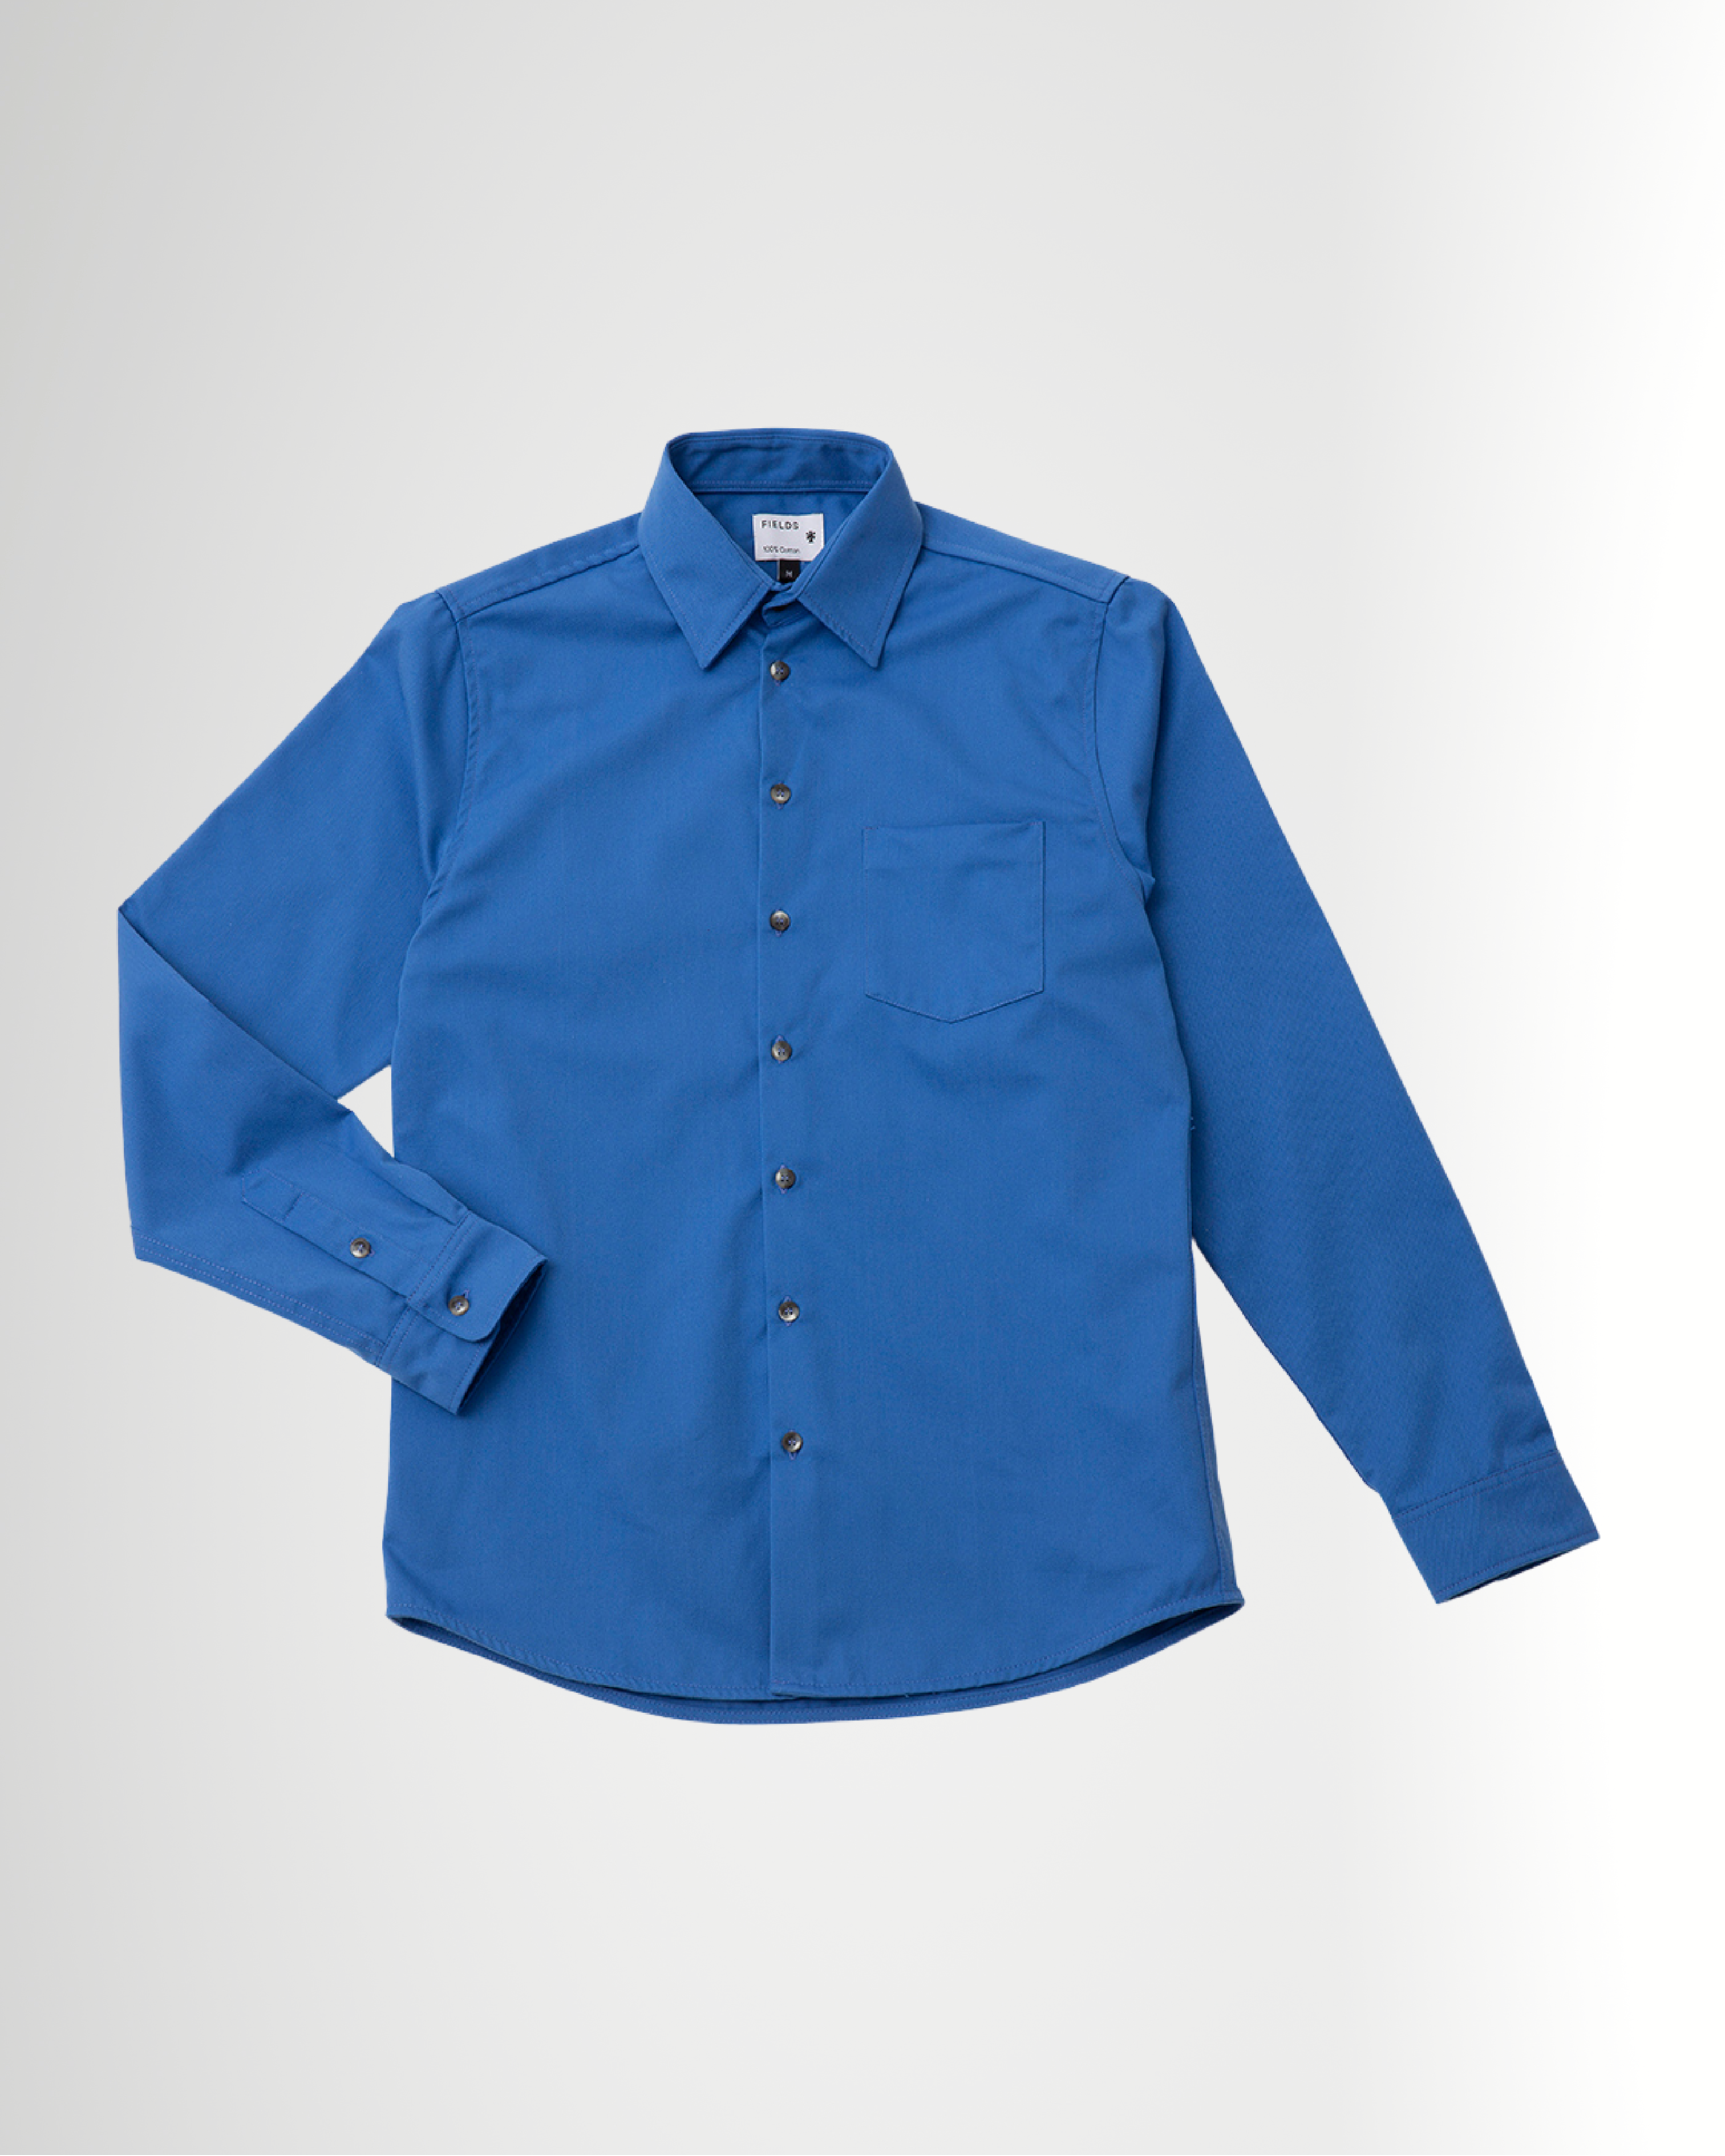 The 1 Pocket Cotton Shirt in Delft